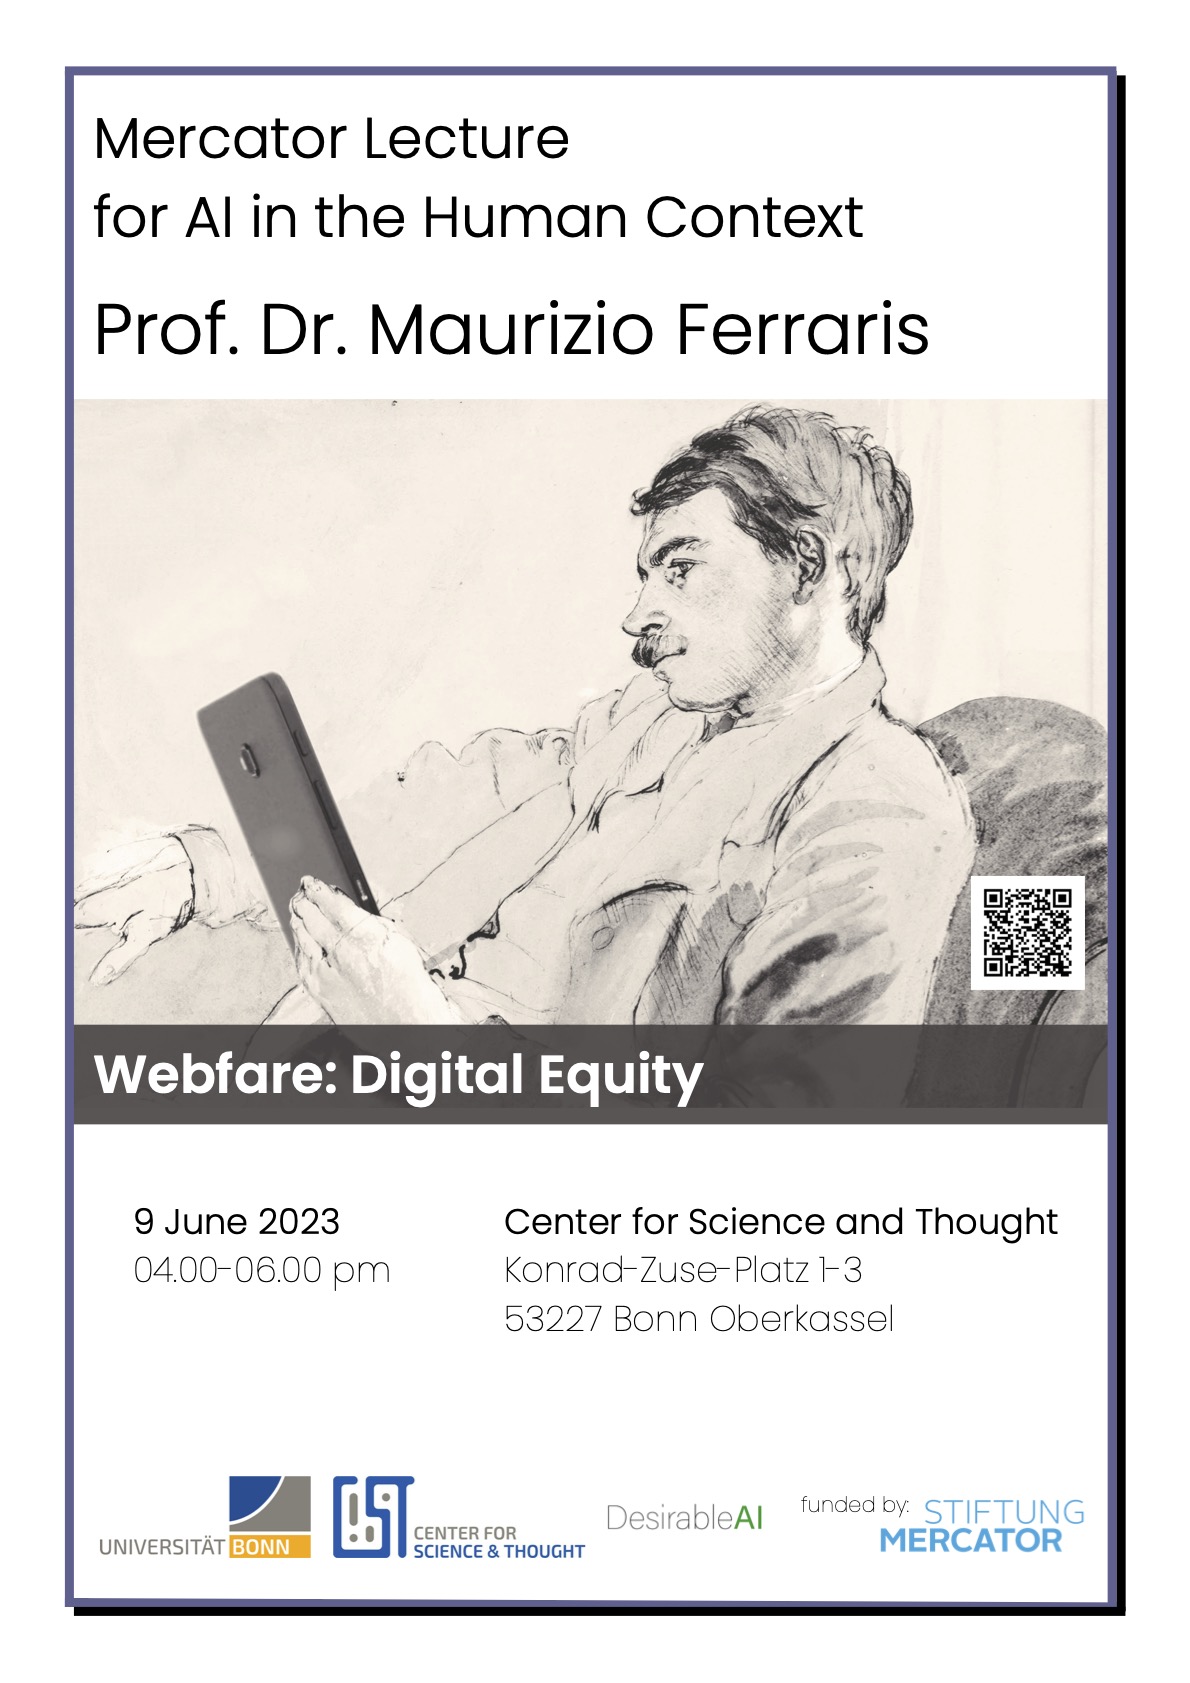 Mercator Lecture for AI in the Human Context: Prof. Dr. Maurizio Ferraris